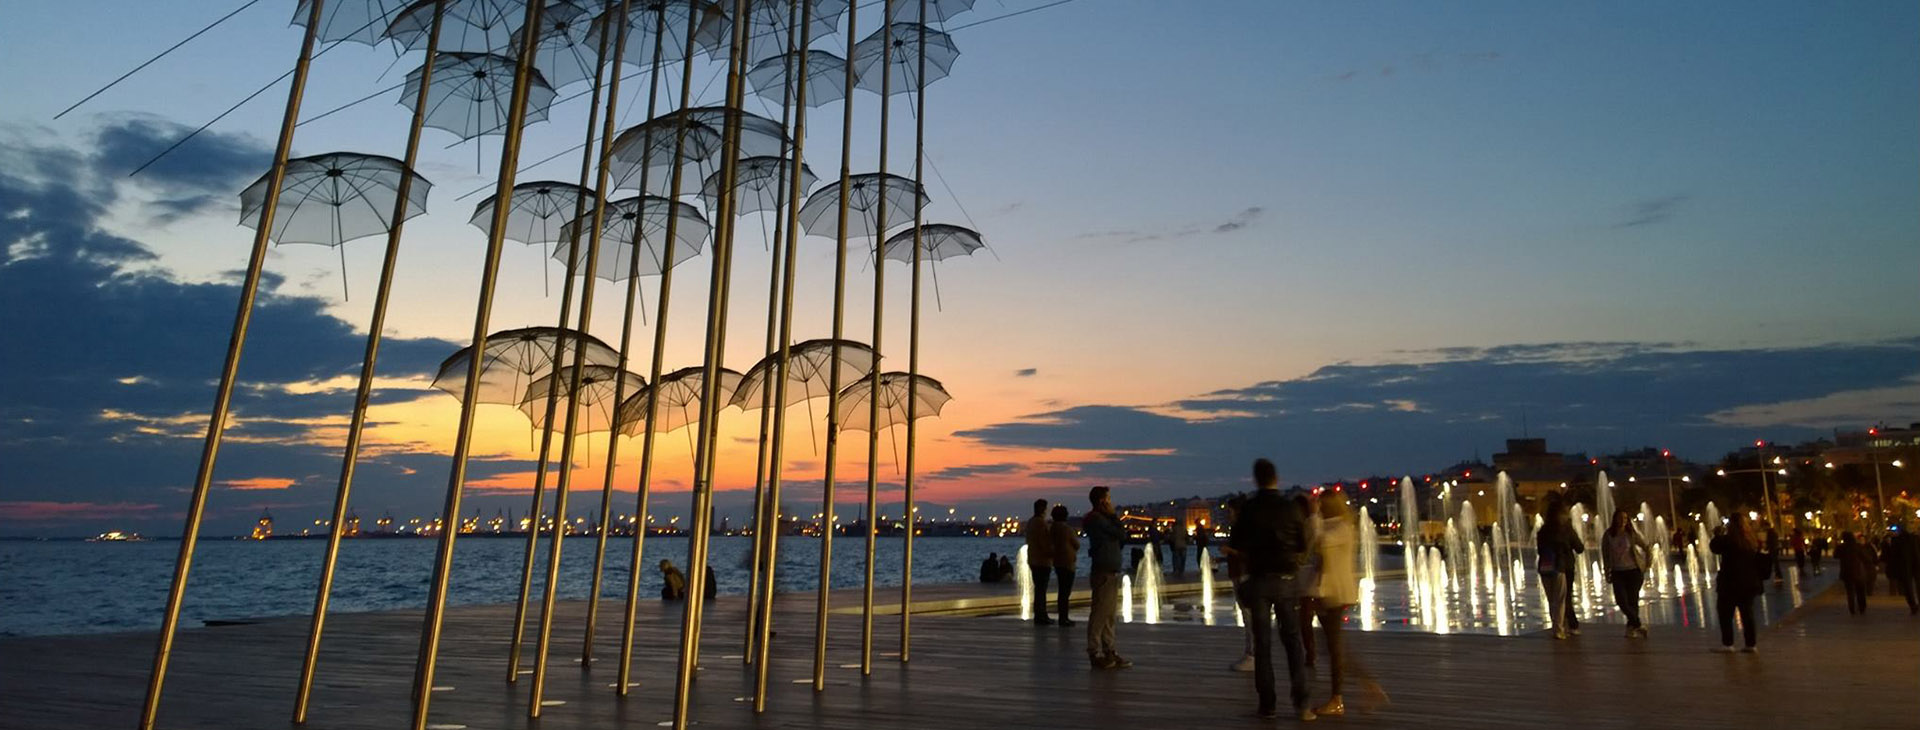 “Umbrellas” modern art statue during sunset at the seafront of Thessaloniki City